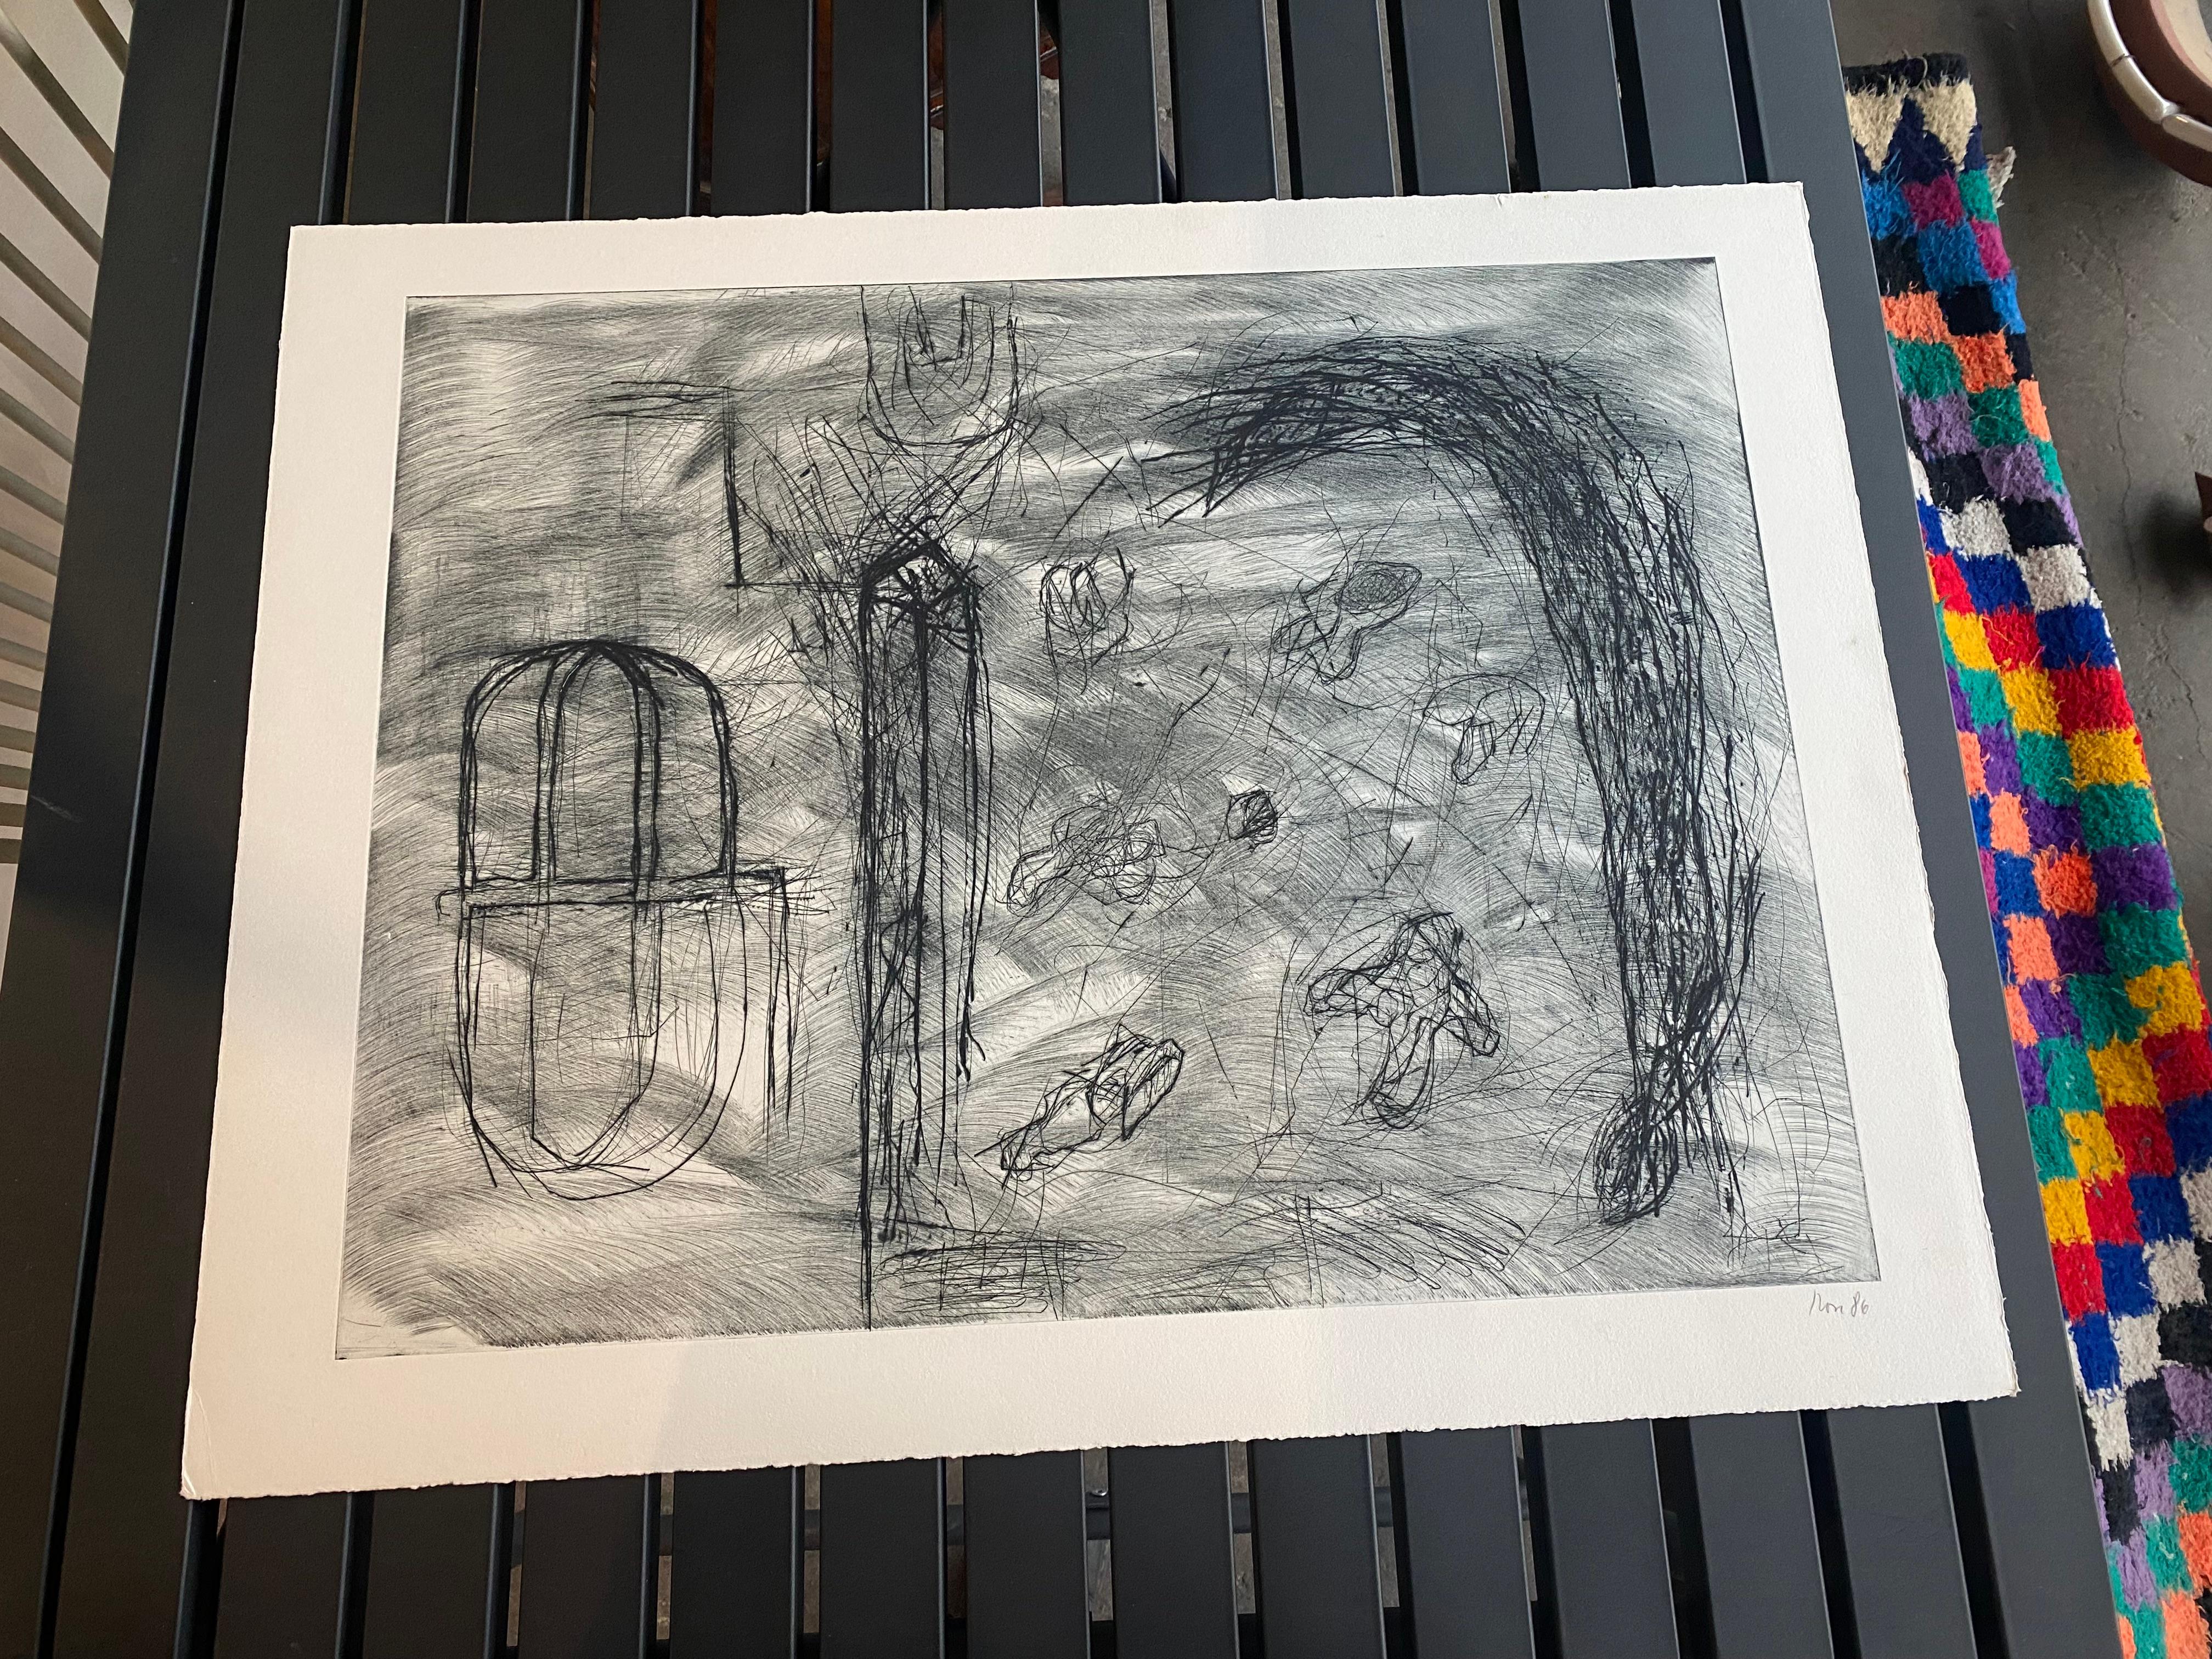 Etching signed and dated by Rolf Rose.
This etching by Rolf Rose is signed and dated in pencil lower right.
The print is unframed and will be sent in a roll.
Rolf Rose is an autodidact artist, he is a member of the Deutscher Künstlerbund, lives